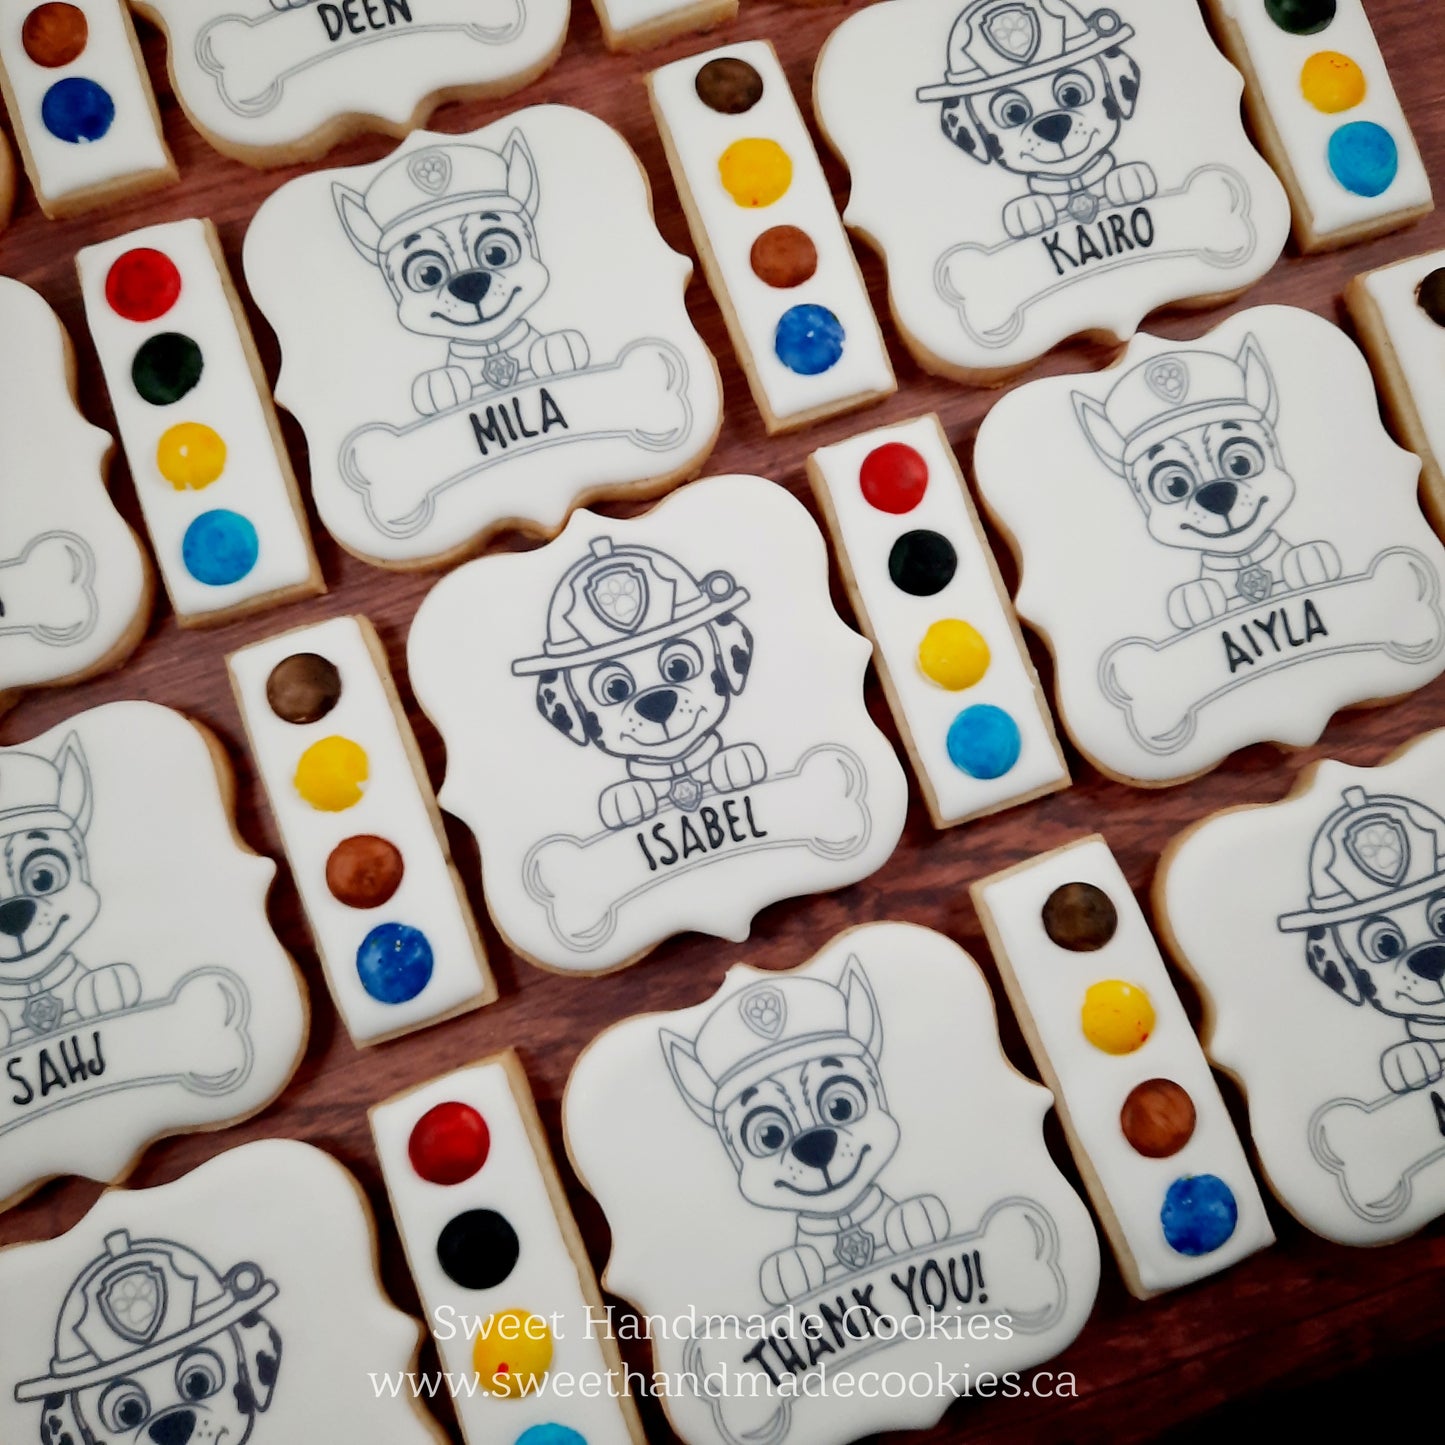 Paint-Your-Own Paw Patrol Cookies